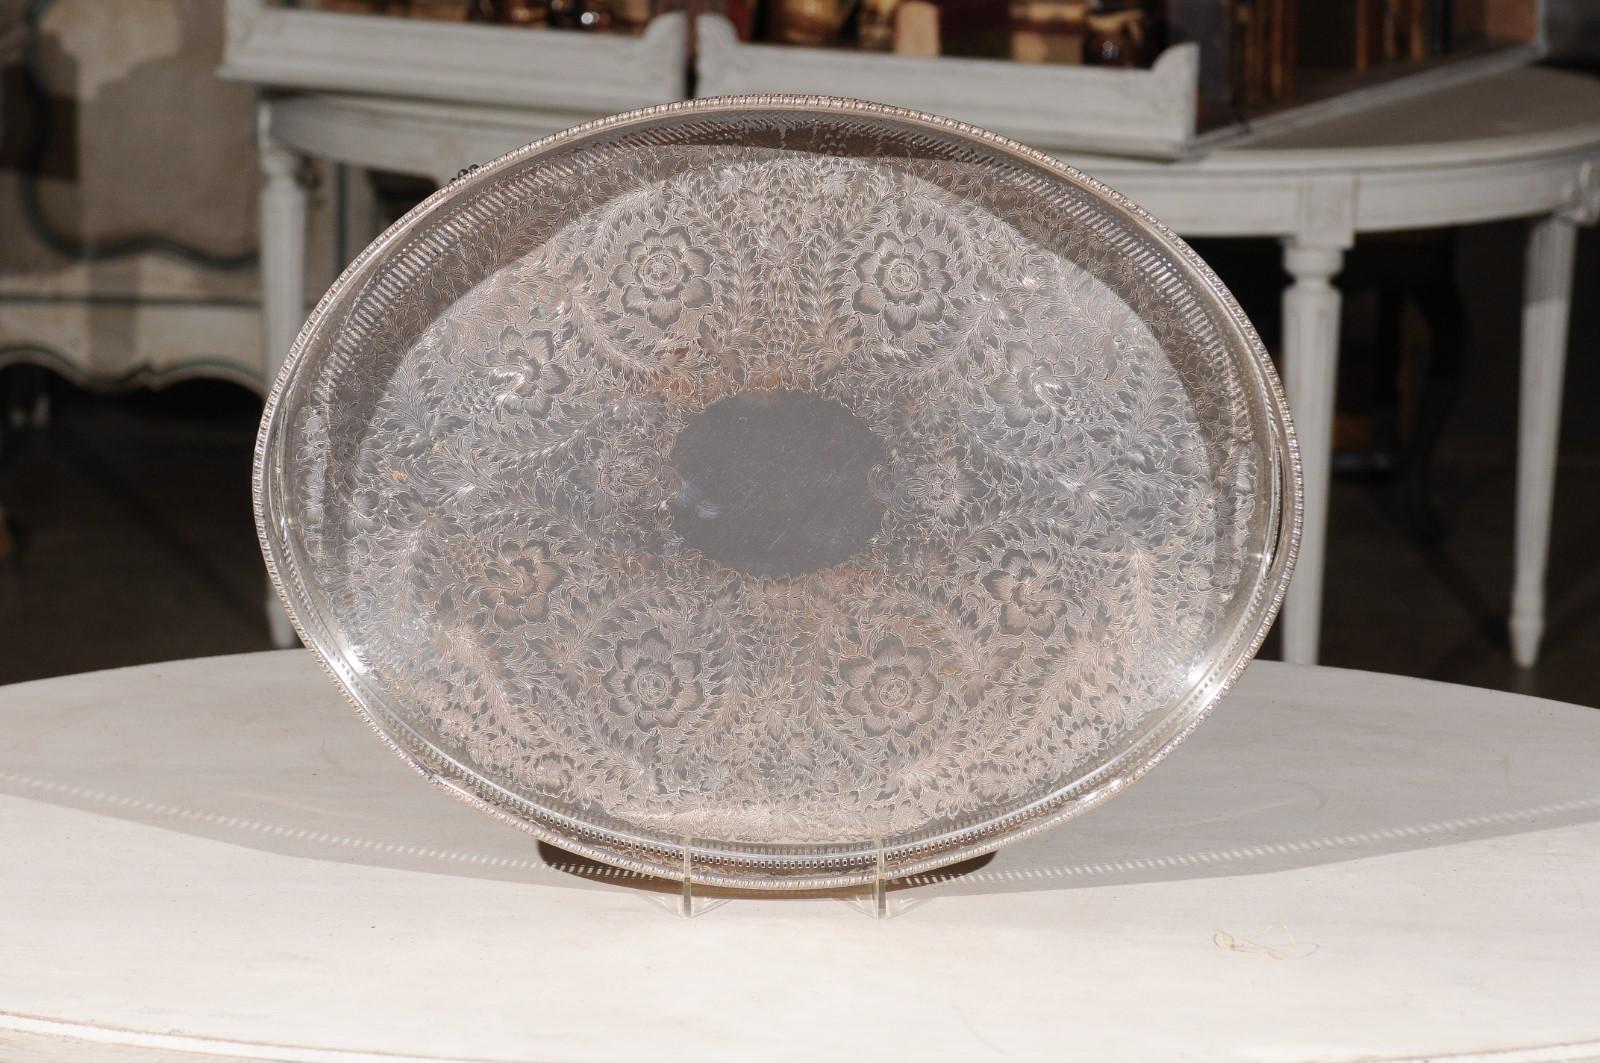 20th Century English Edwardian Period Silver Plated Tray with Floral Motifs and Petite Feet For Sale